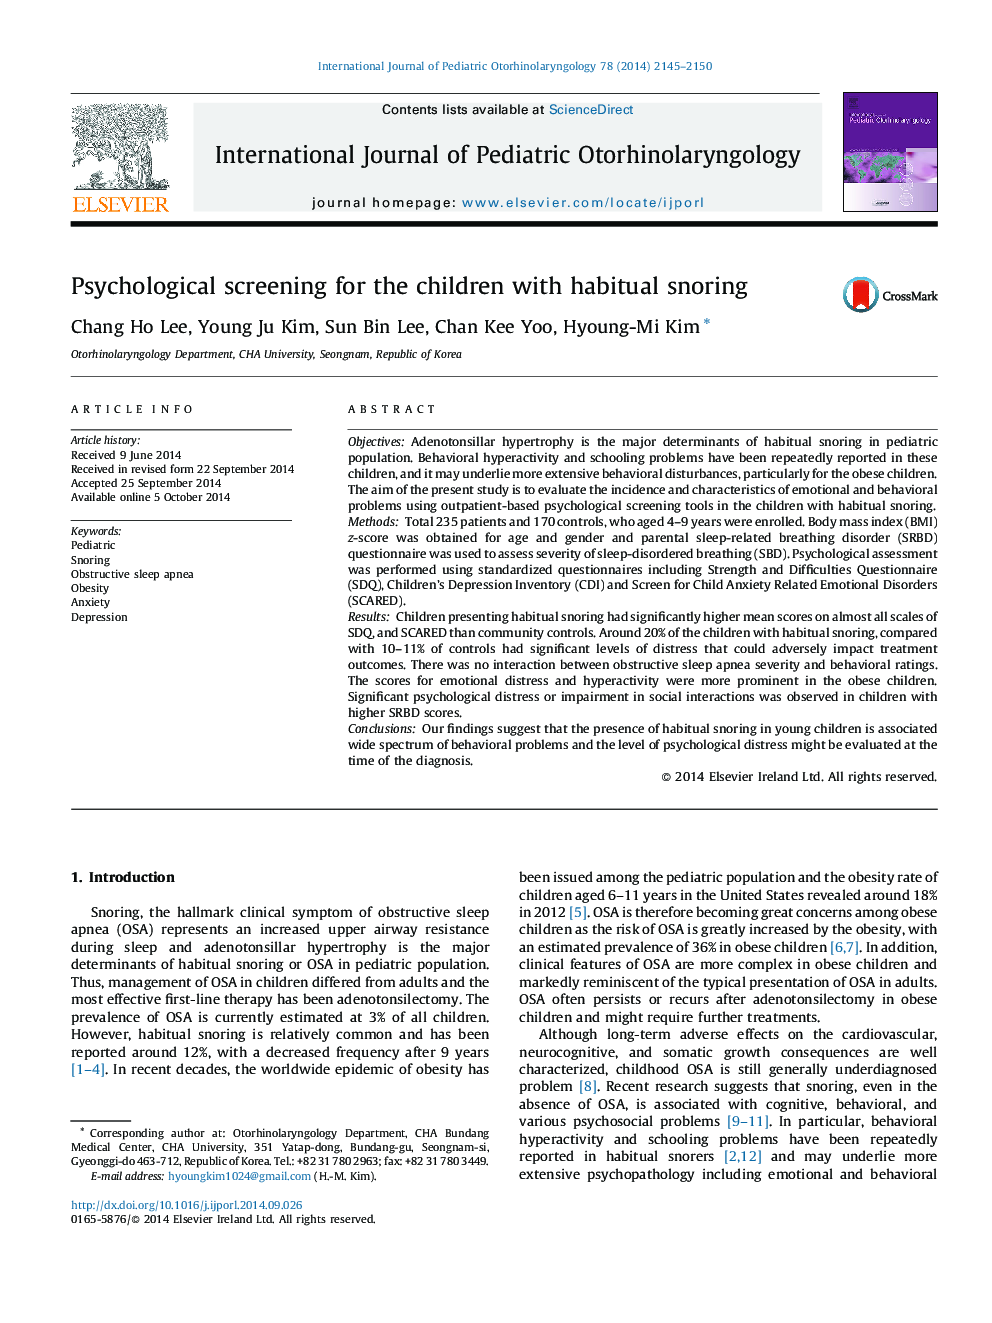 Psychological screening for the children with habitual snoring